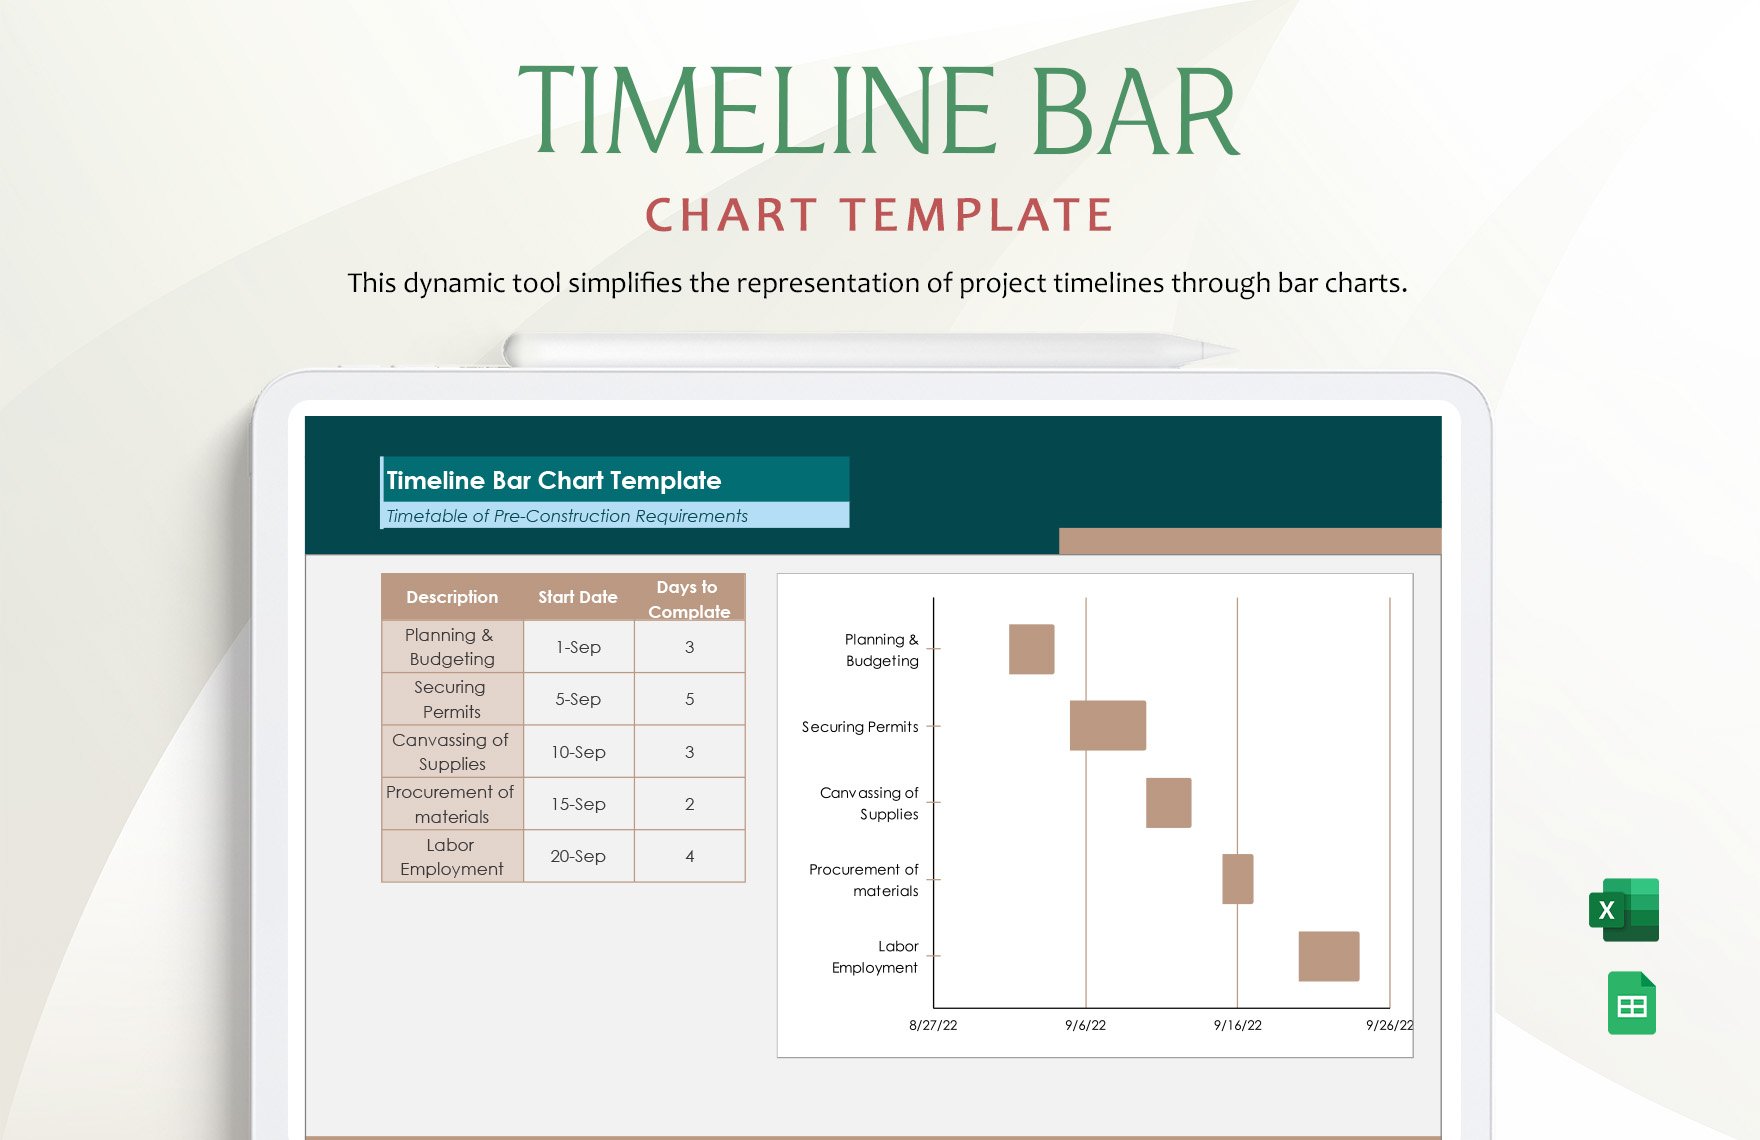 Timeline Bar Chart Template in Excel, Google Sheets